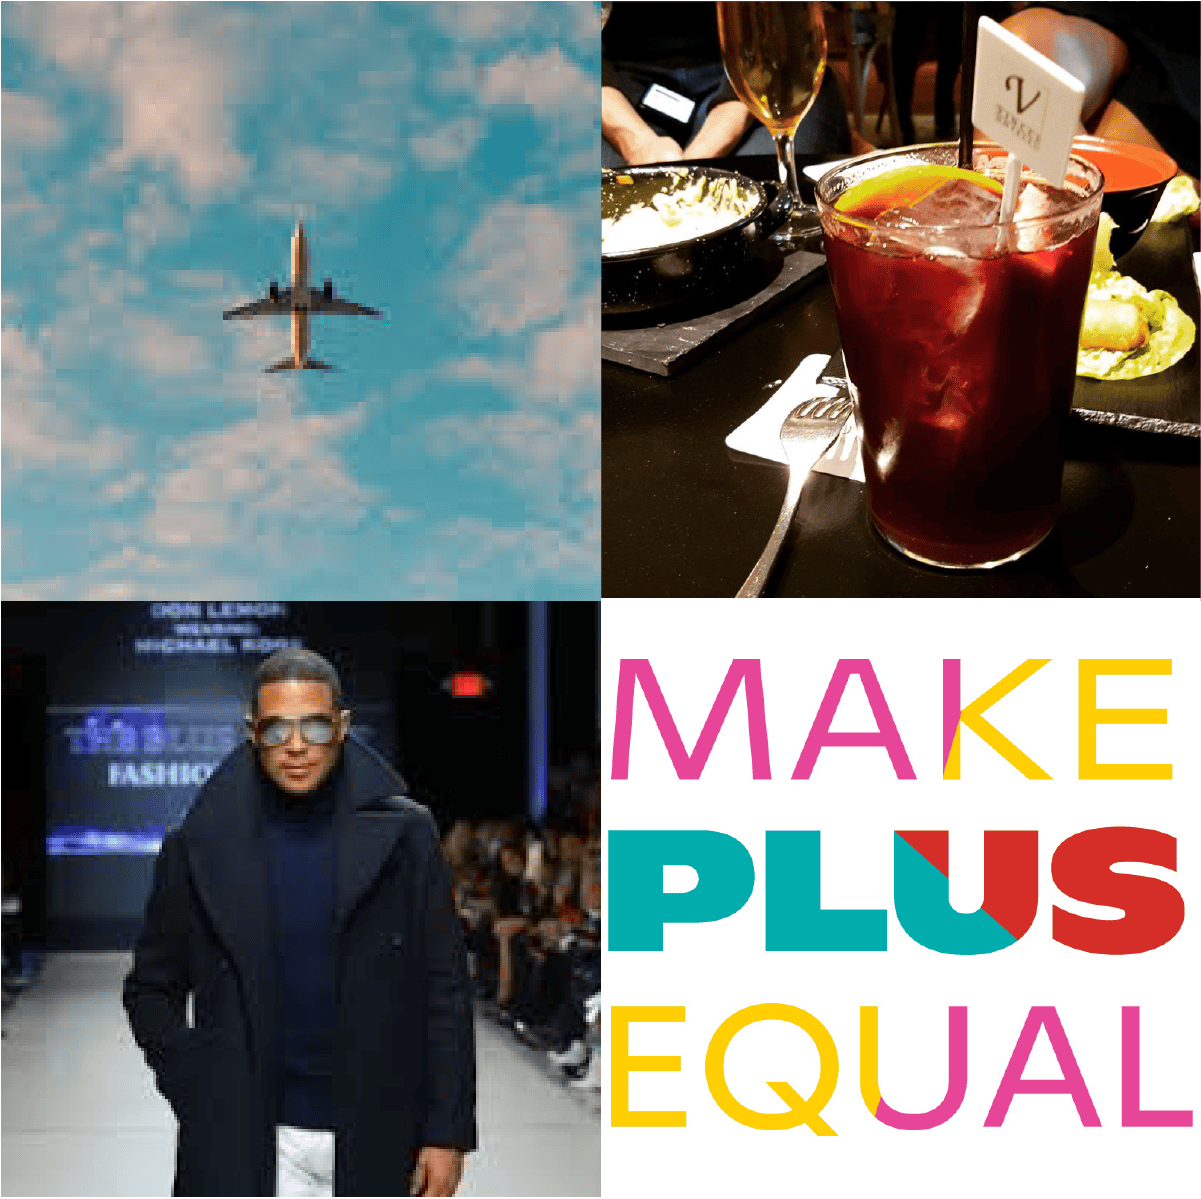 A collage of travel pictures including an airplane in a cloud-filled sky, a glass of sangria, male model walking the runway, and the Make Plus Equal logo